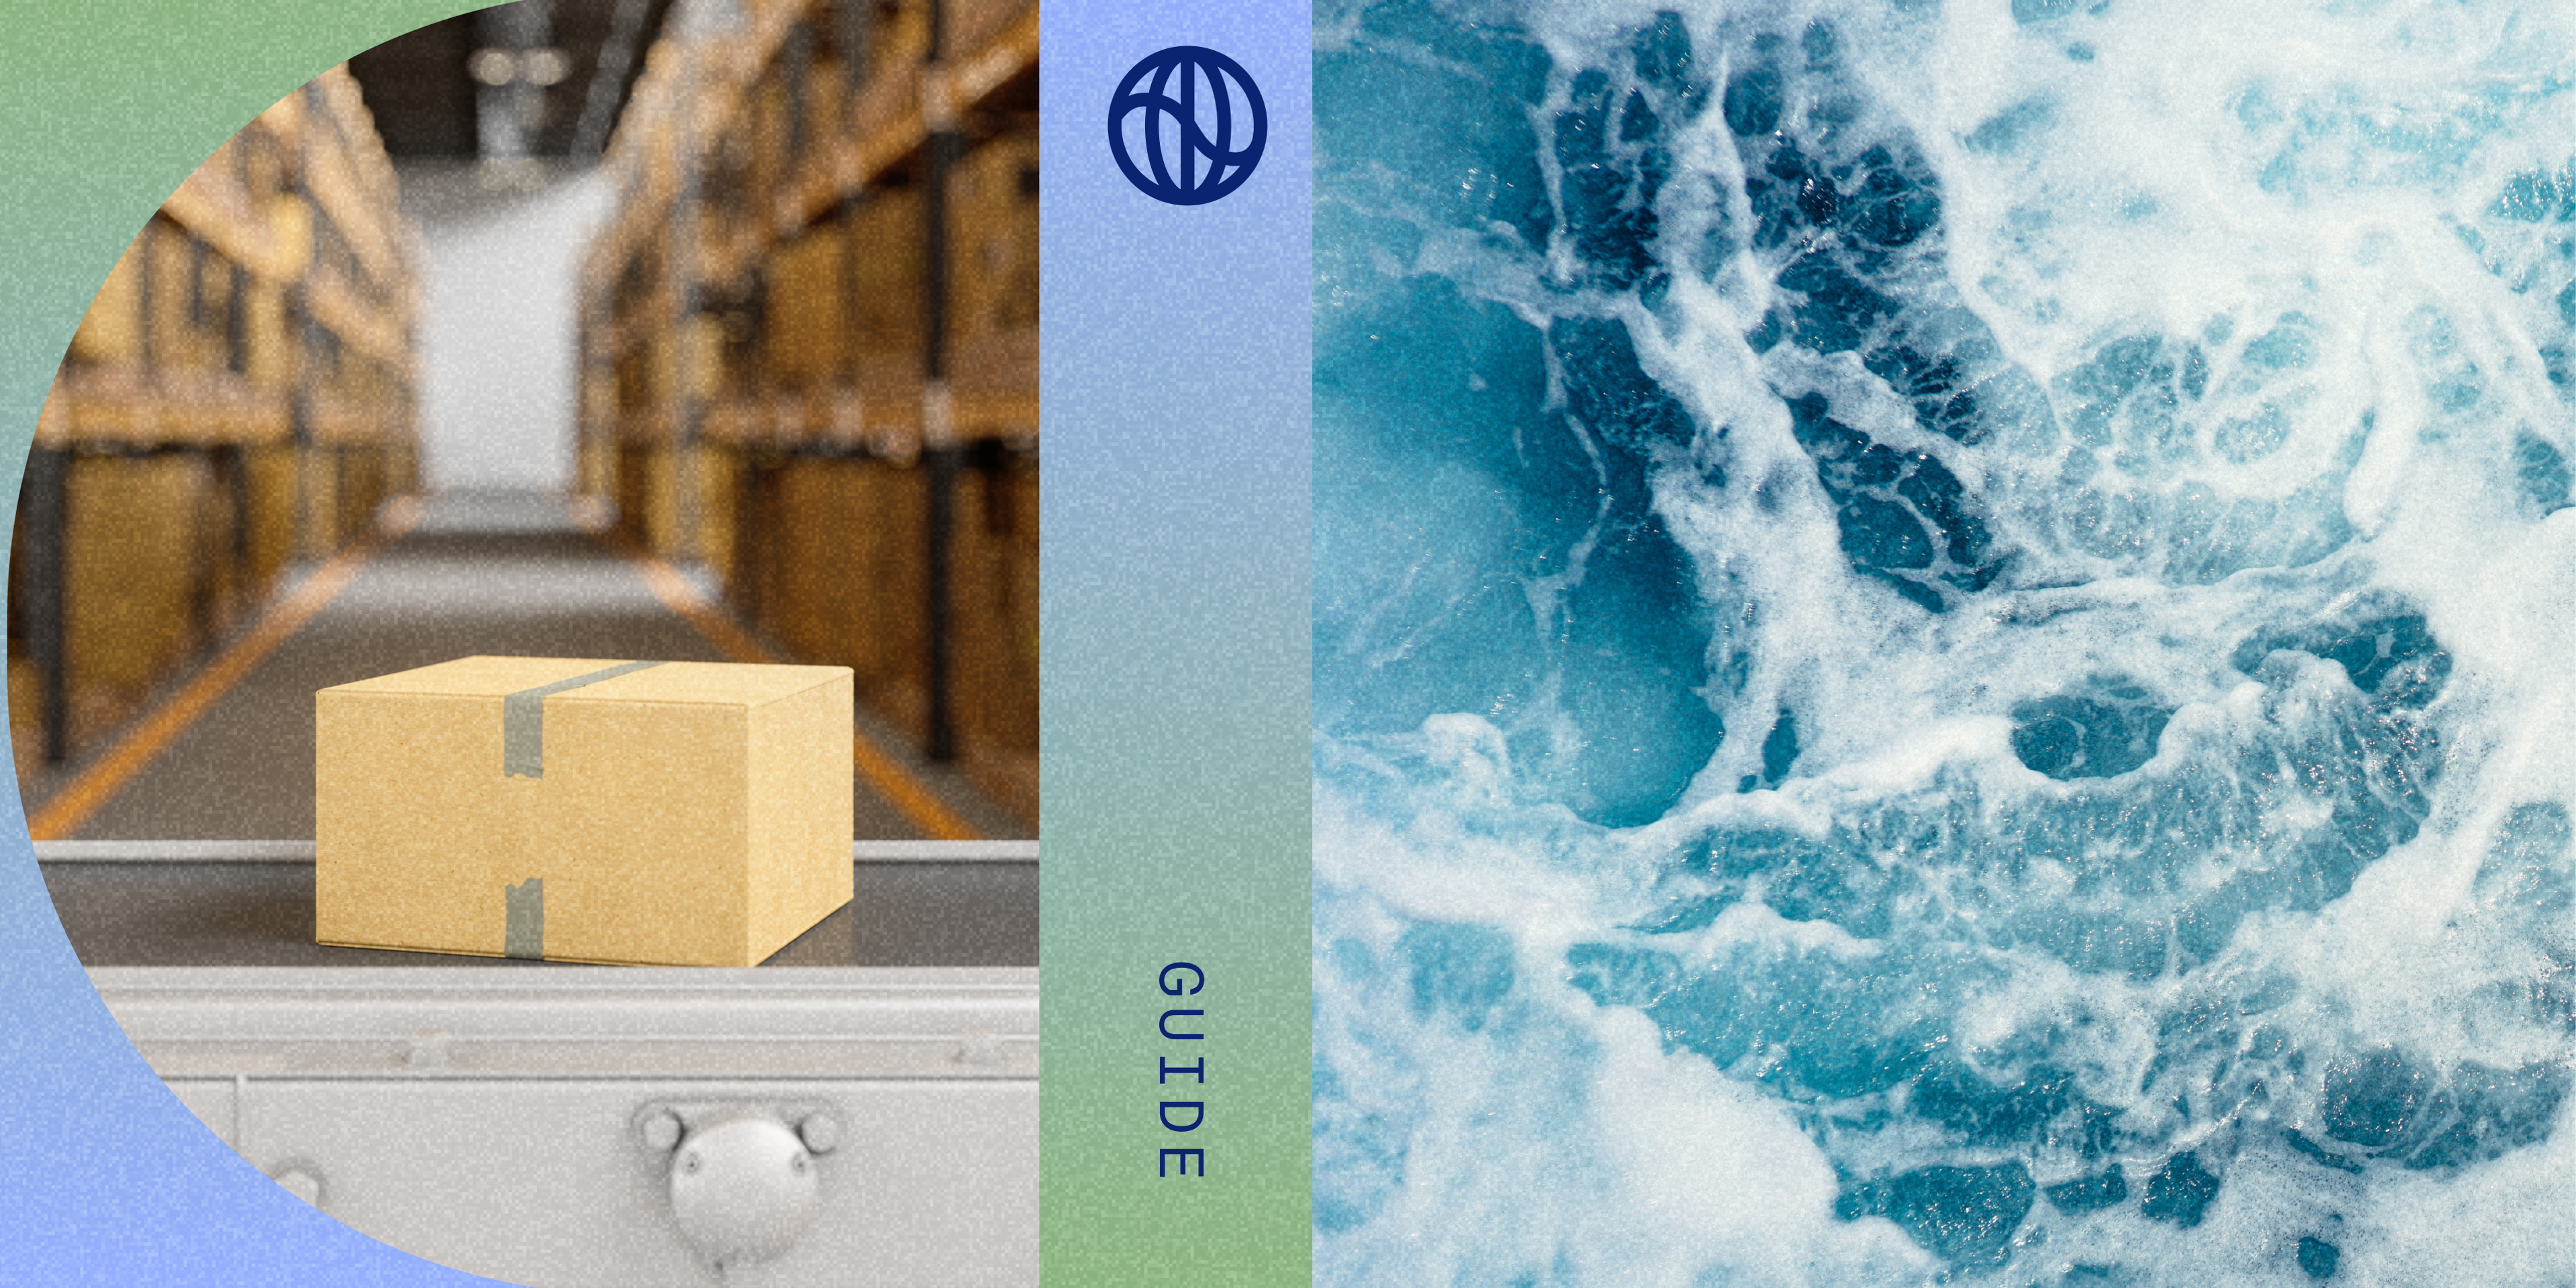 Two images side by side - box ready to ship and swirling water. Conveys climate risk for business and SEC and CSRD regulations. Text: Guide